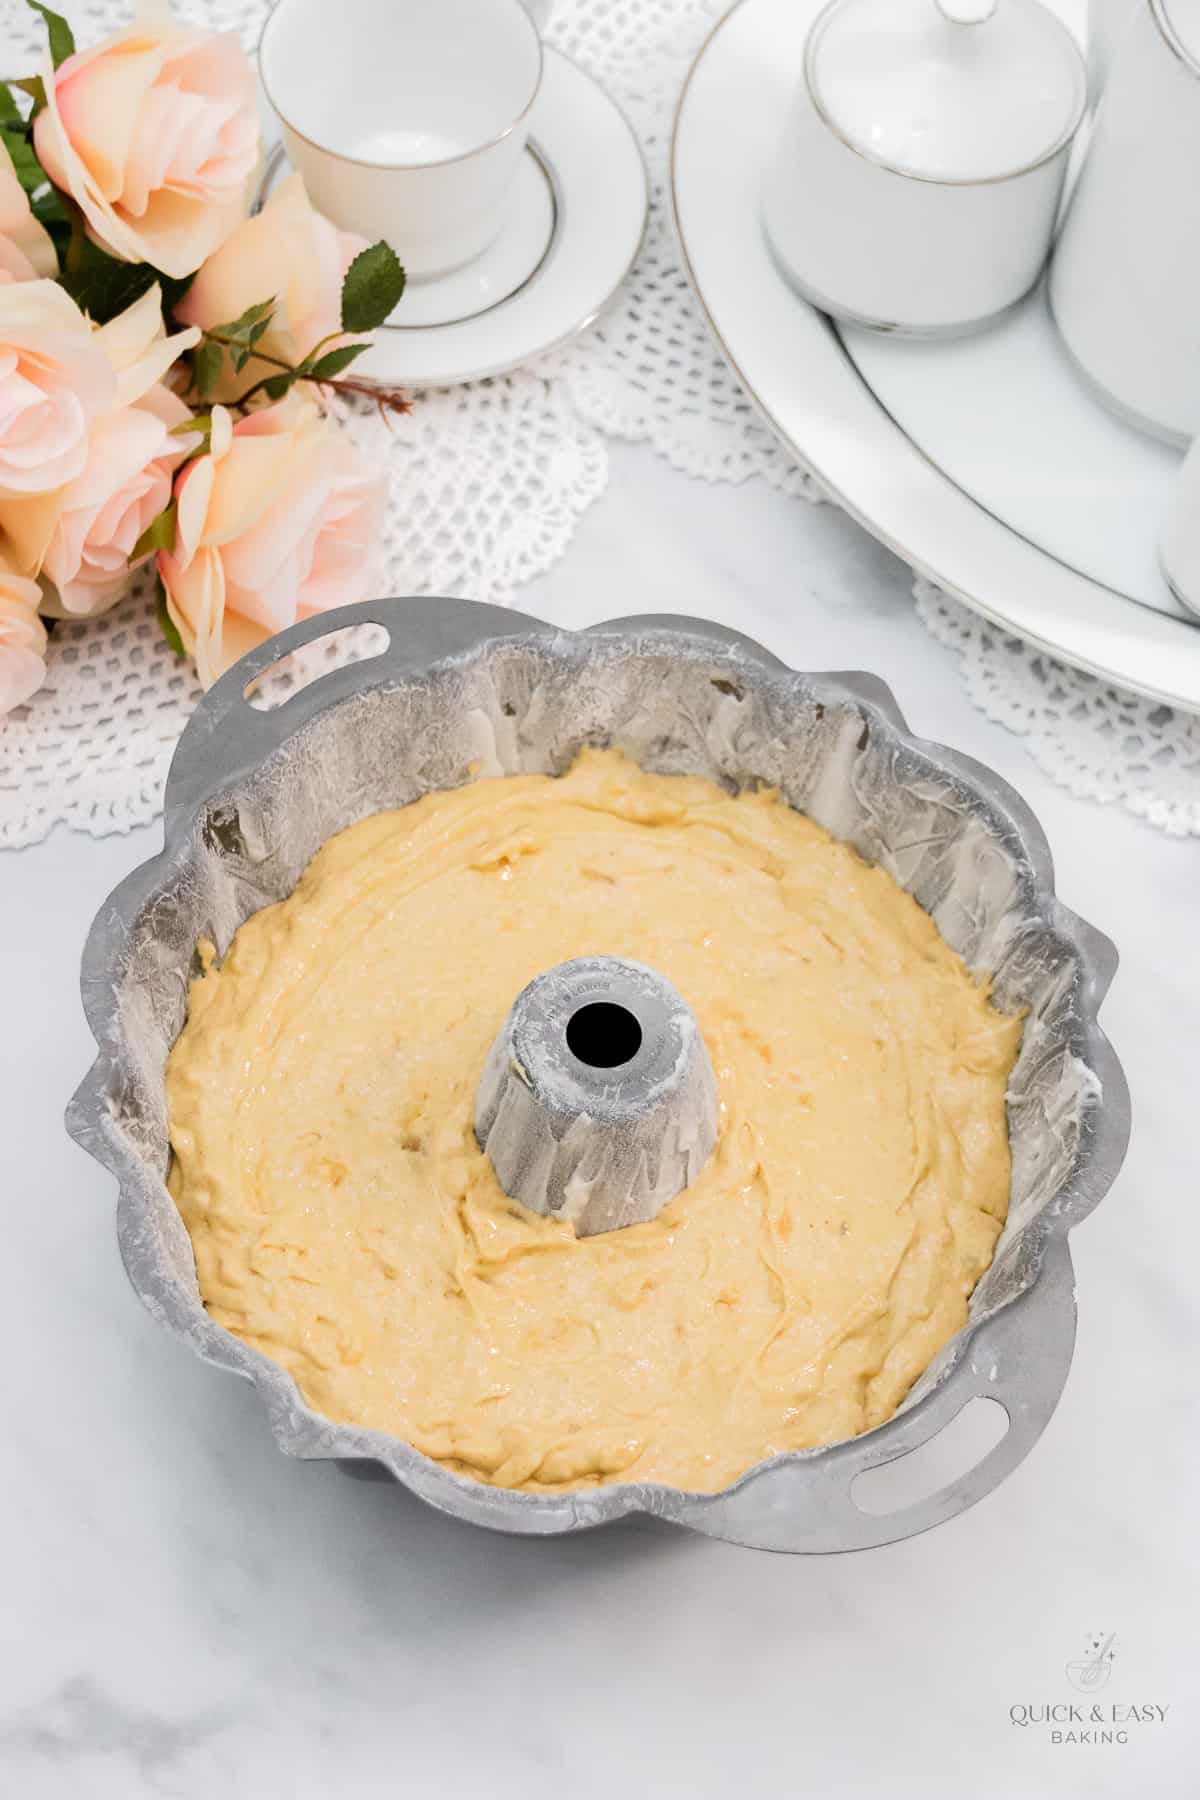 Cake batter with apples in a bundt pan.